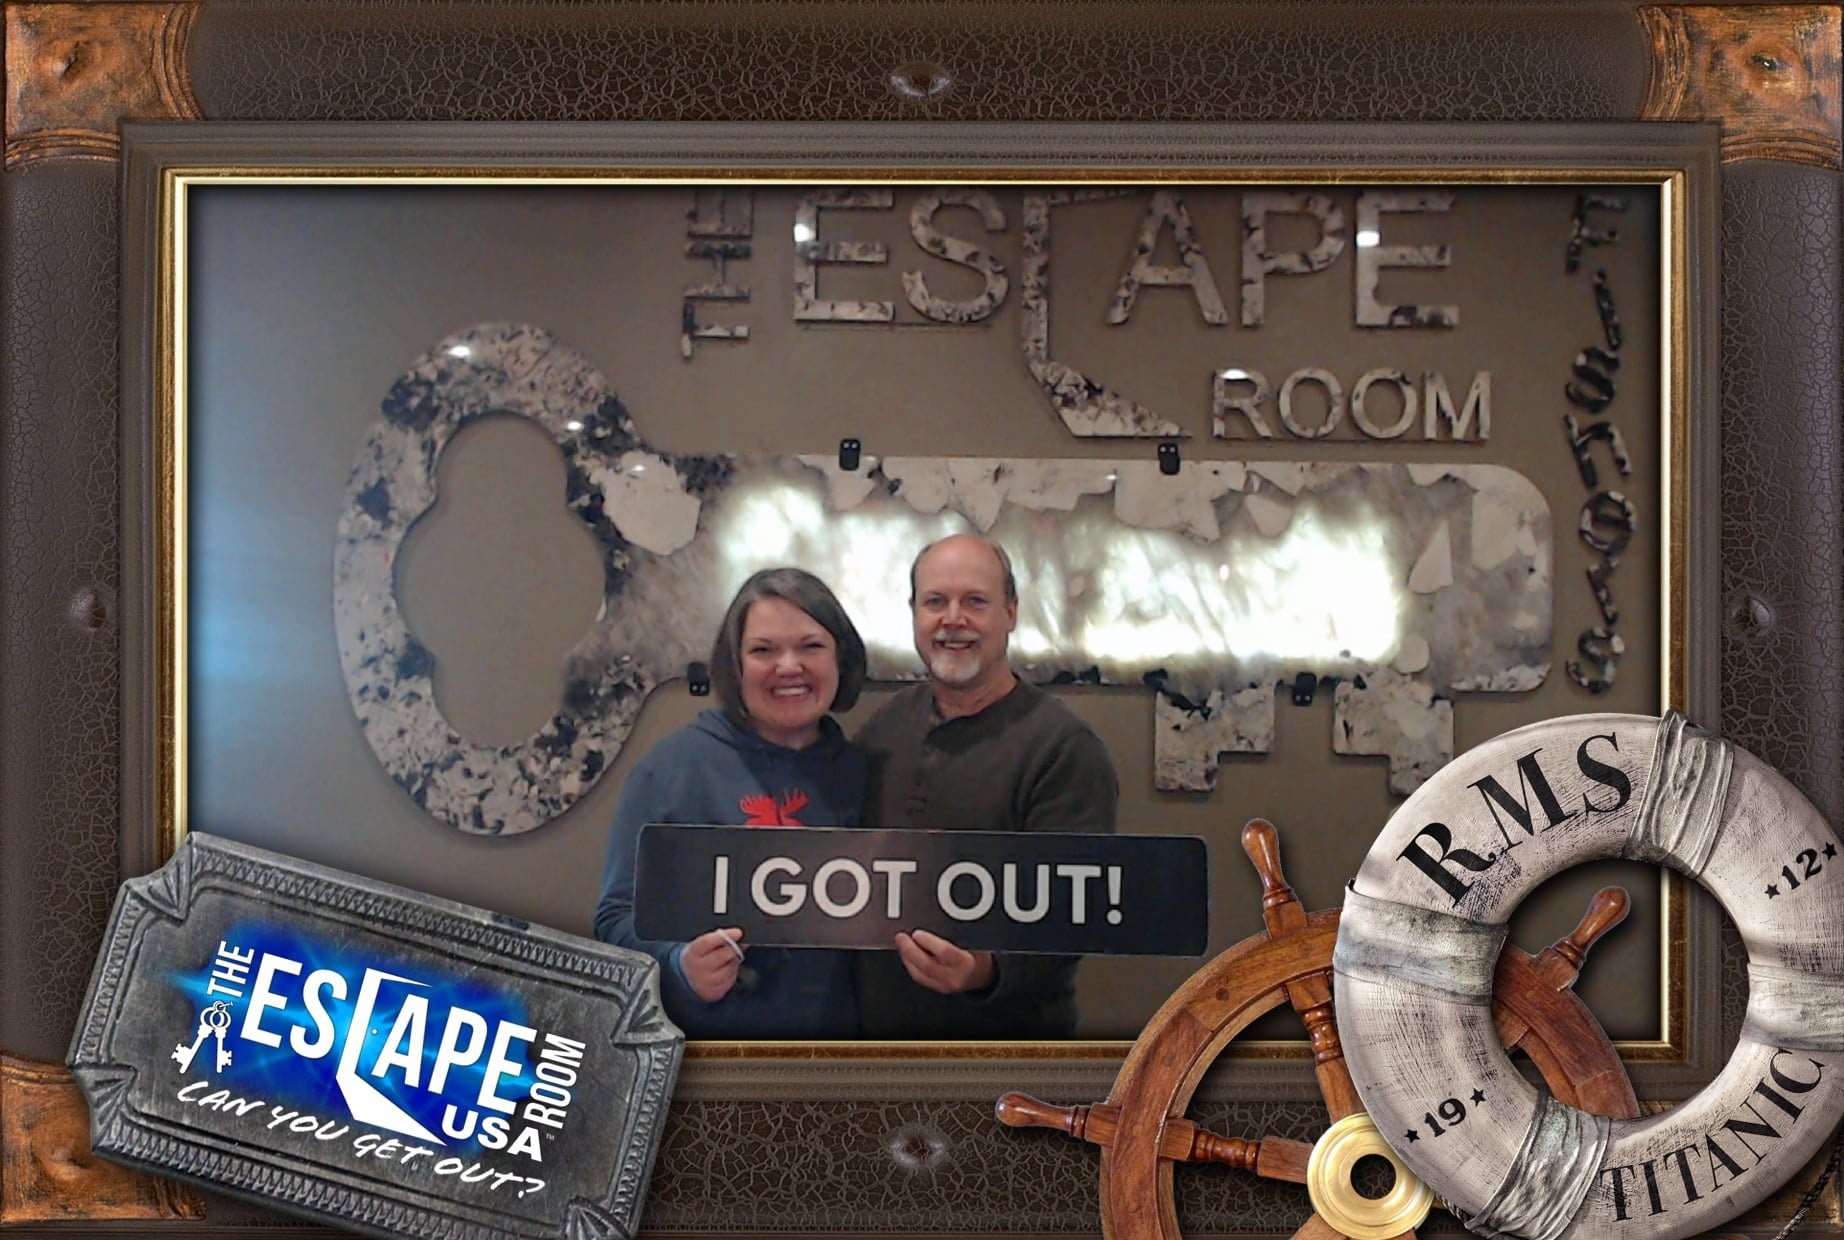 The Escape Room Fishers